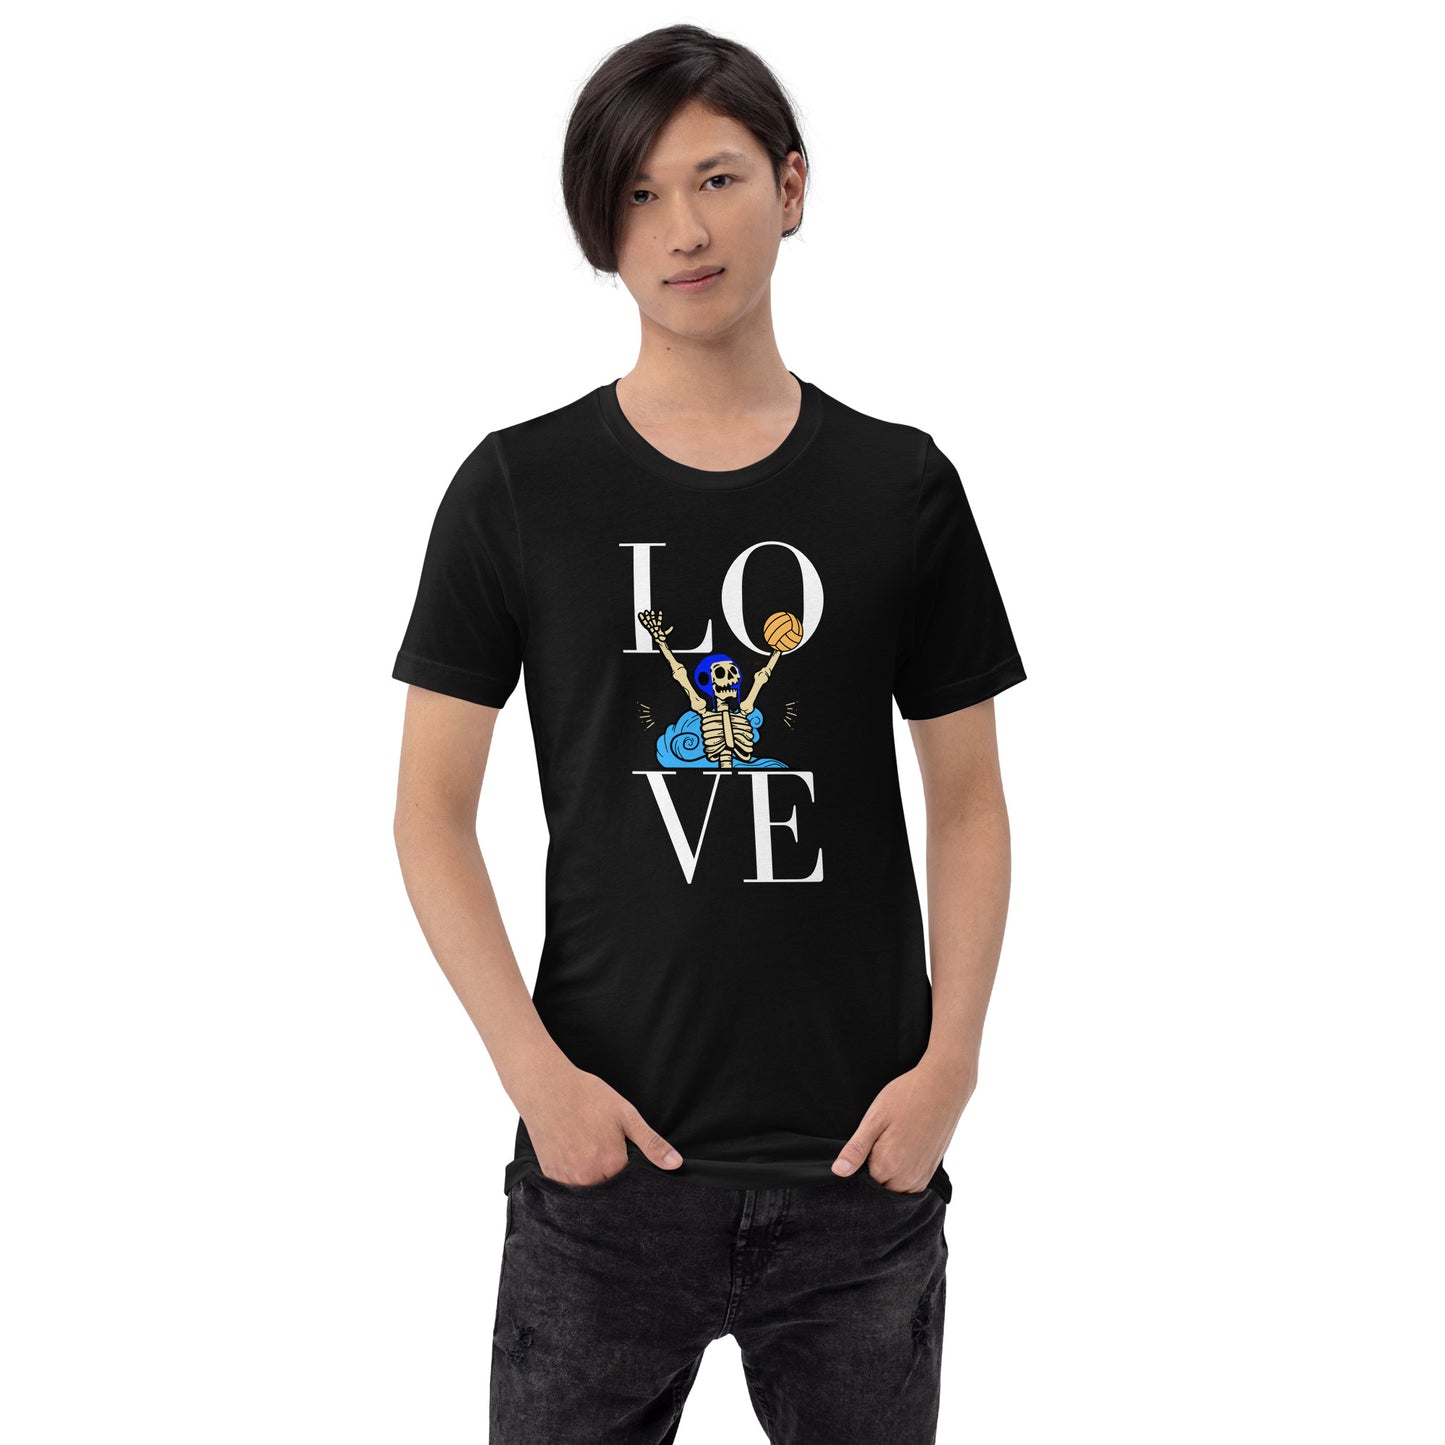 LOVE Waterpolo and Skeletons - Unisex Soft T-shirt - Bella Canvas 3001